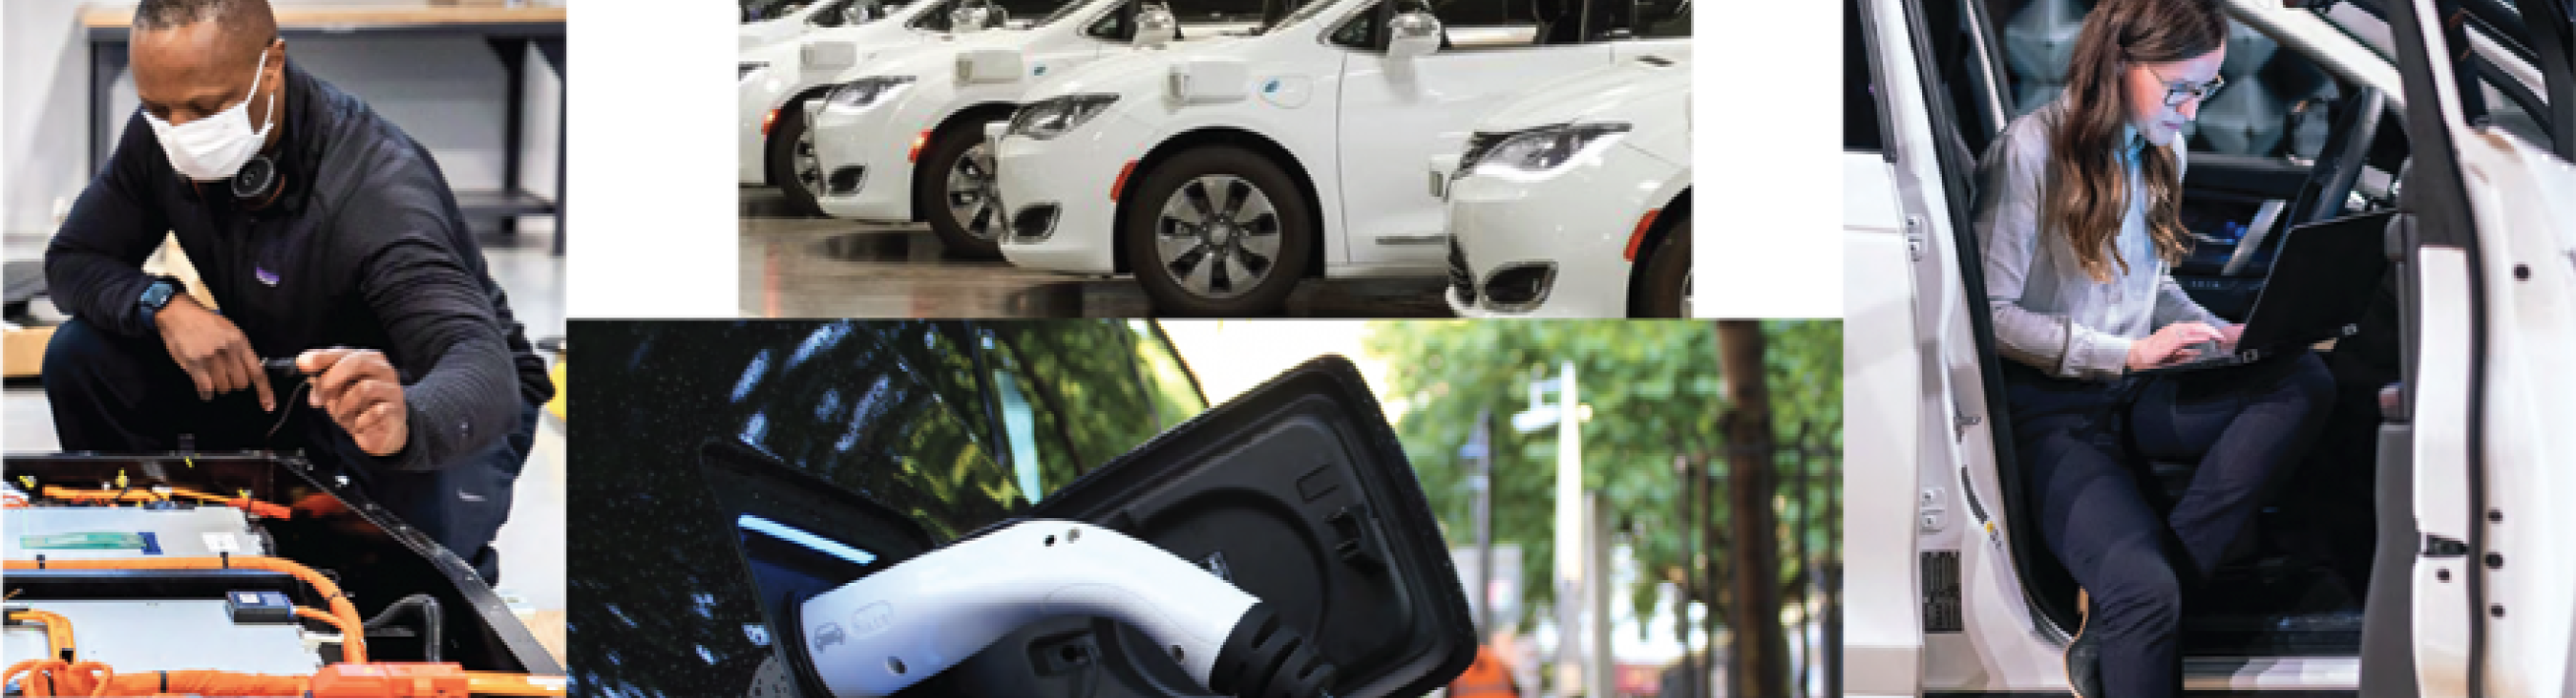 The State of Michigan is gearing up for electrifying changes in the automotive world in the next few decades, thanks in large part to the dedicated teams on Governor Whitmer's Council on Future Mobility and Electrification and Council on Climate Solutions.  